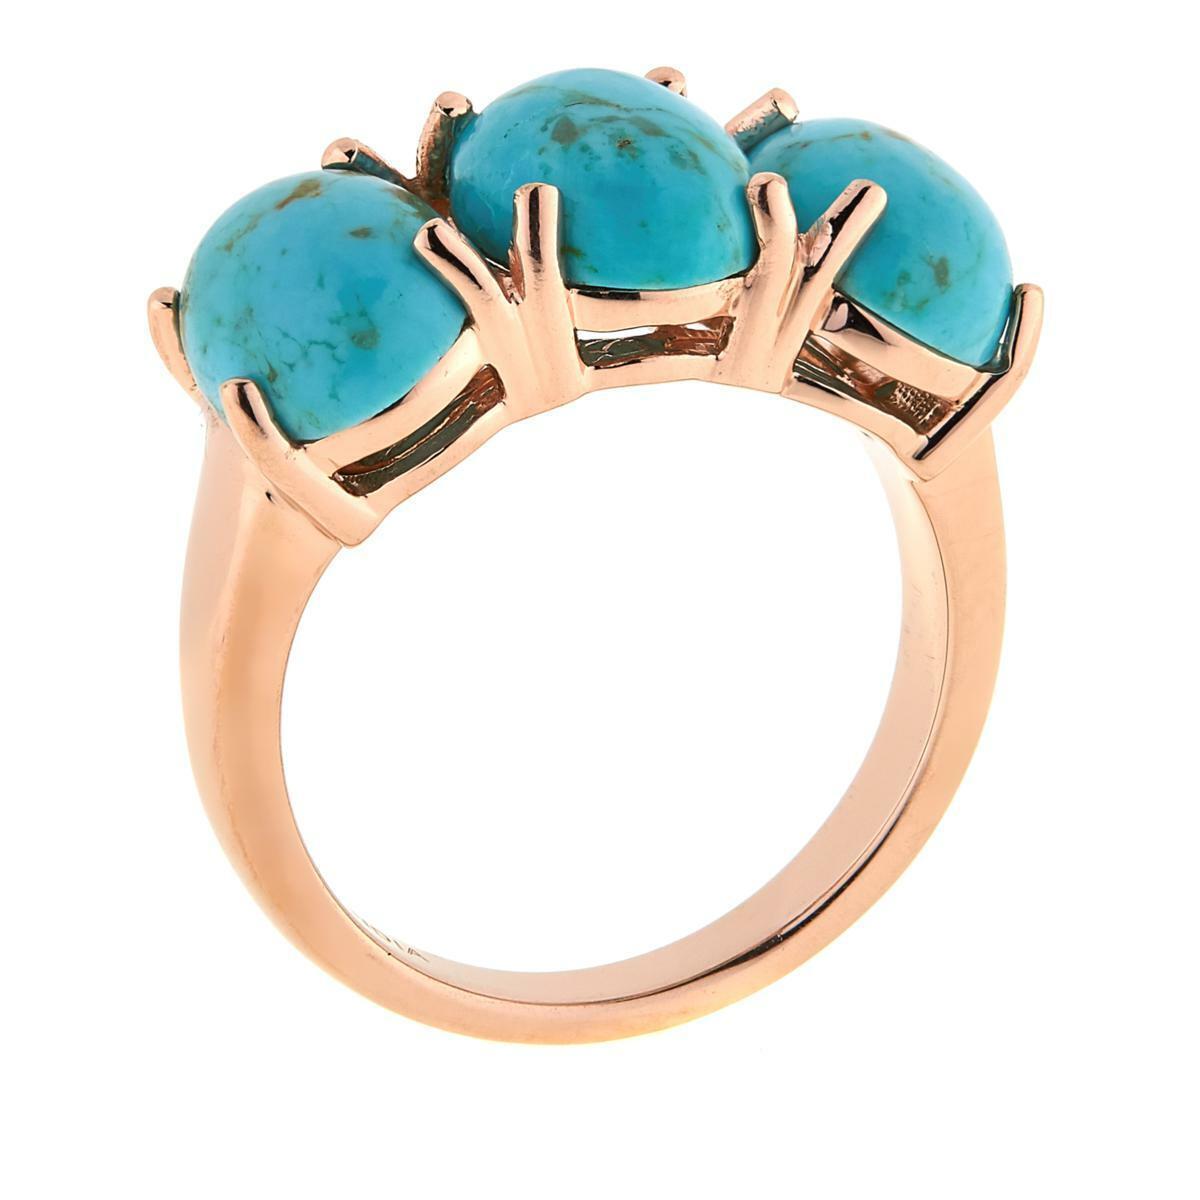 Paul Deasy Gem Rose Gold Plated 3-Stone Kingman Turquoise Ring Size 5 Hsn $101